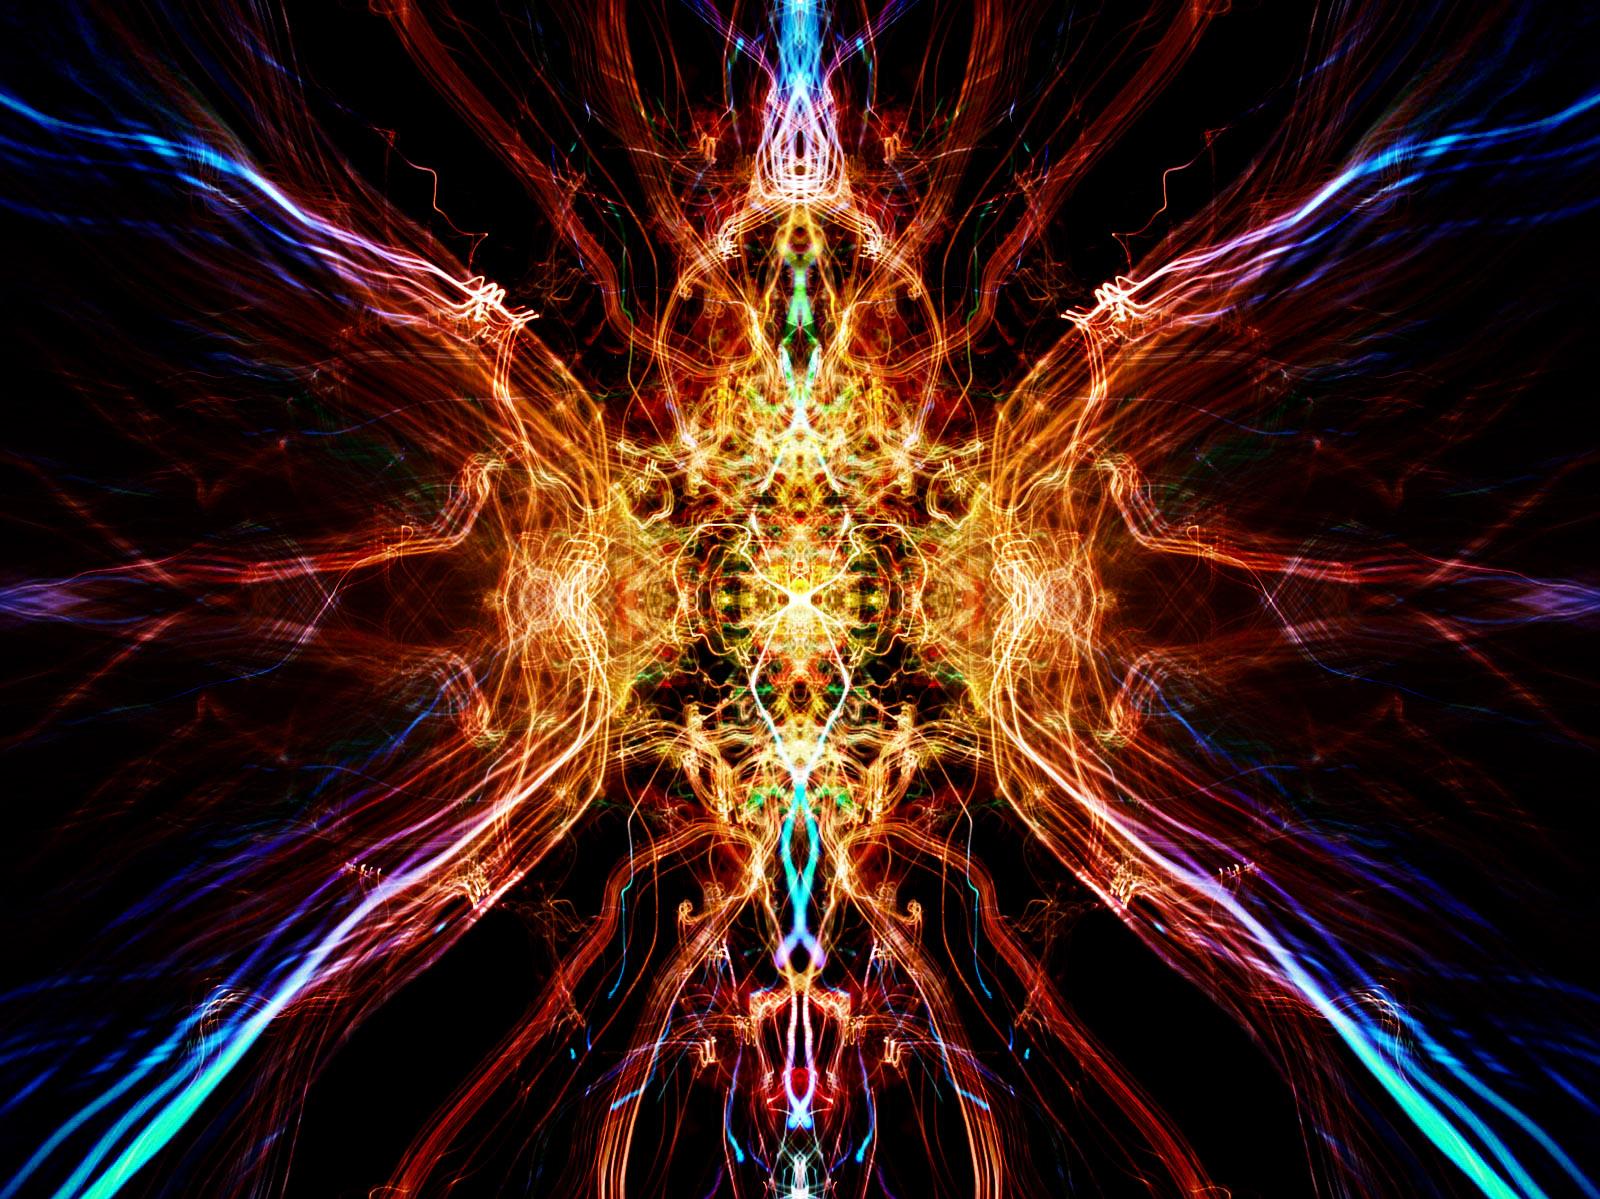 Abstract Cool Wallpaper